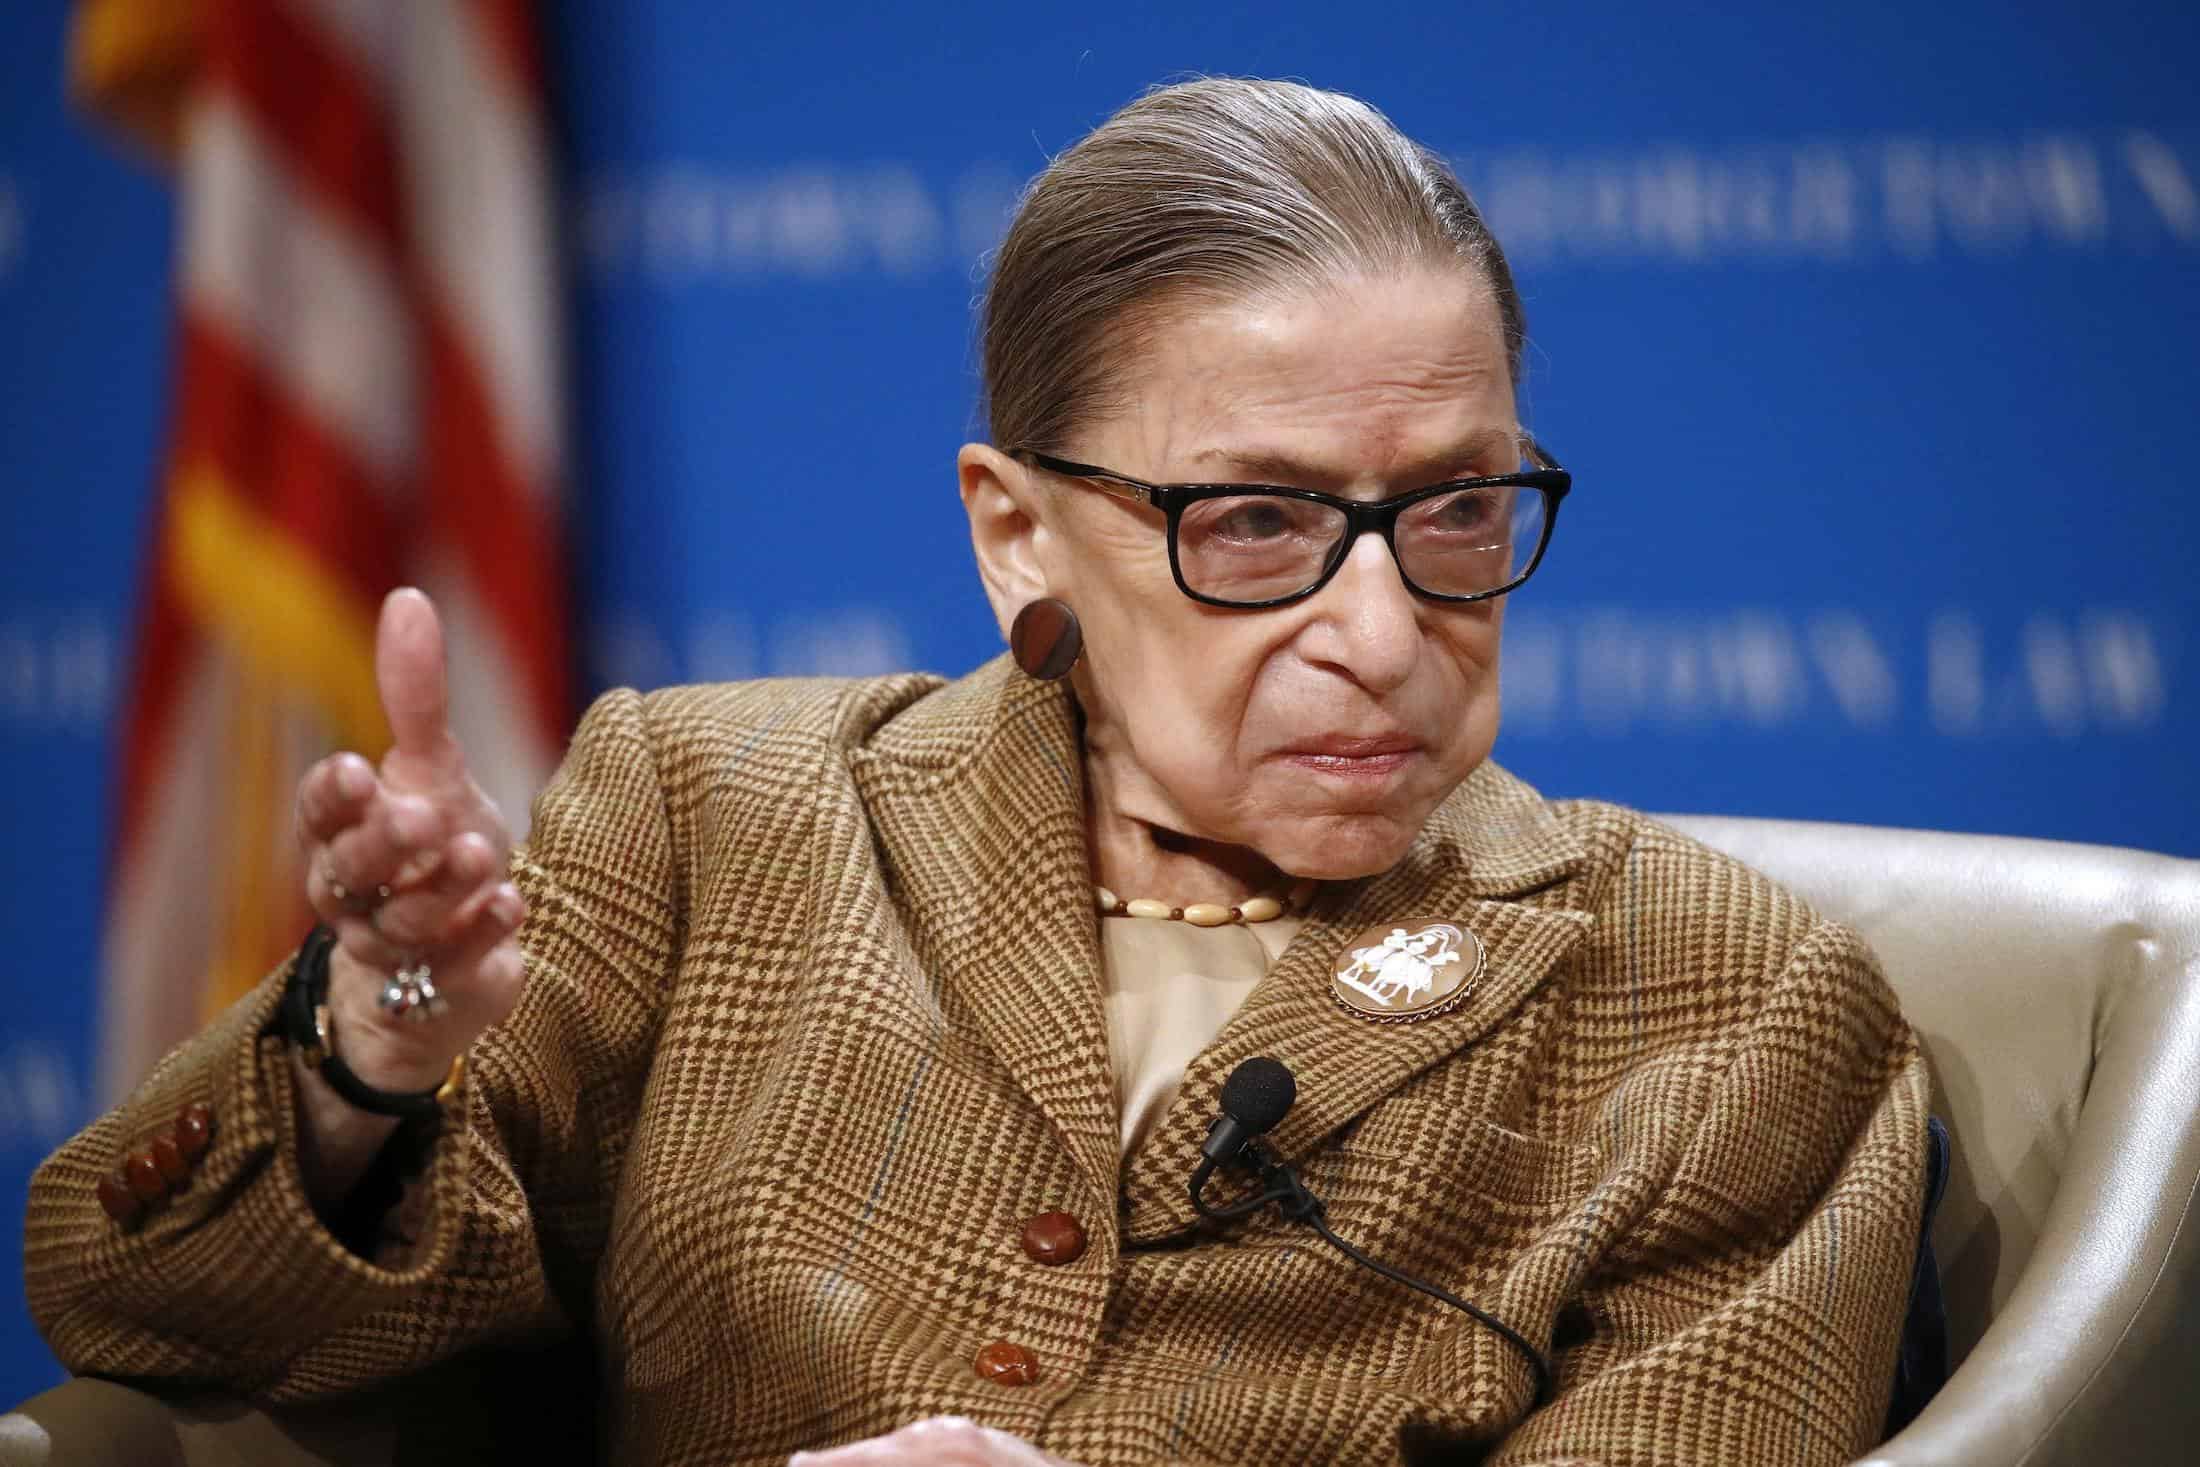 15 powerful tributes to Ruth Bader Ginsburg who didn’t want be replaced until Trump was unseated